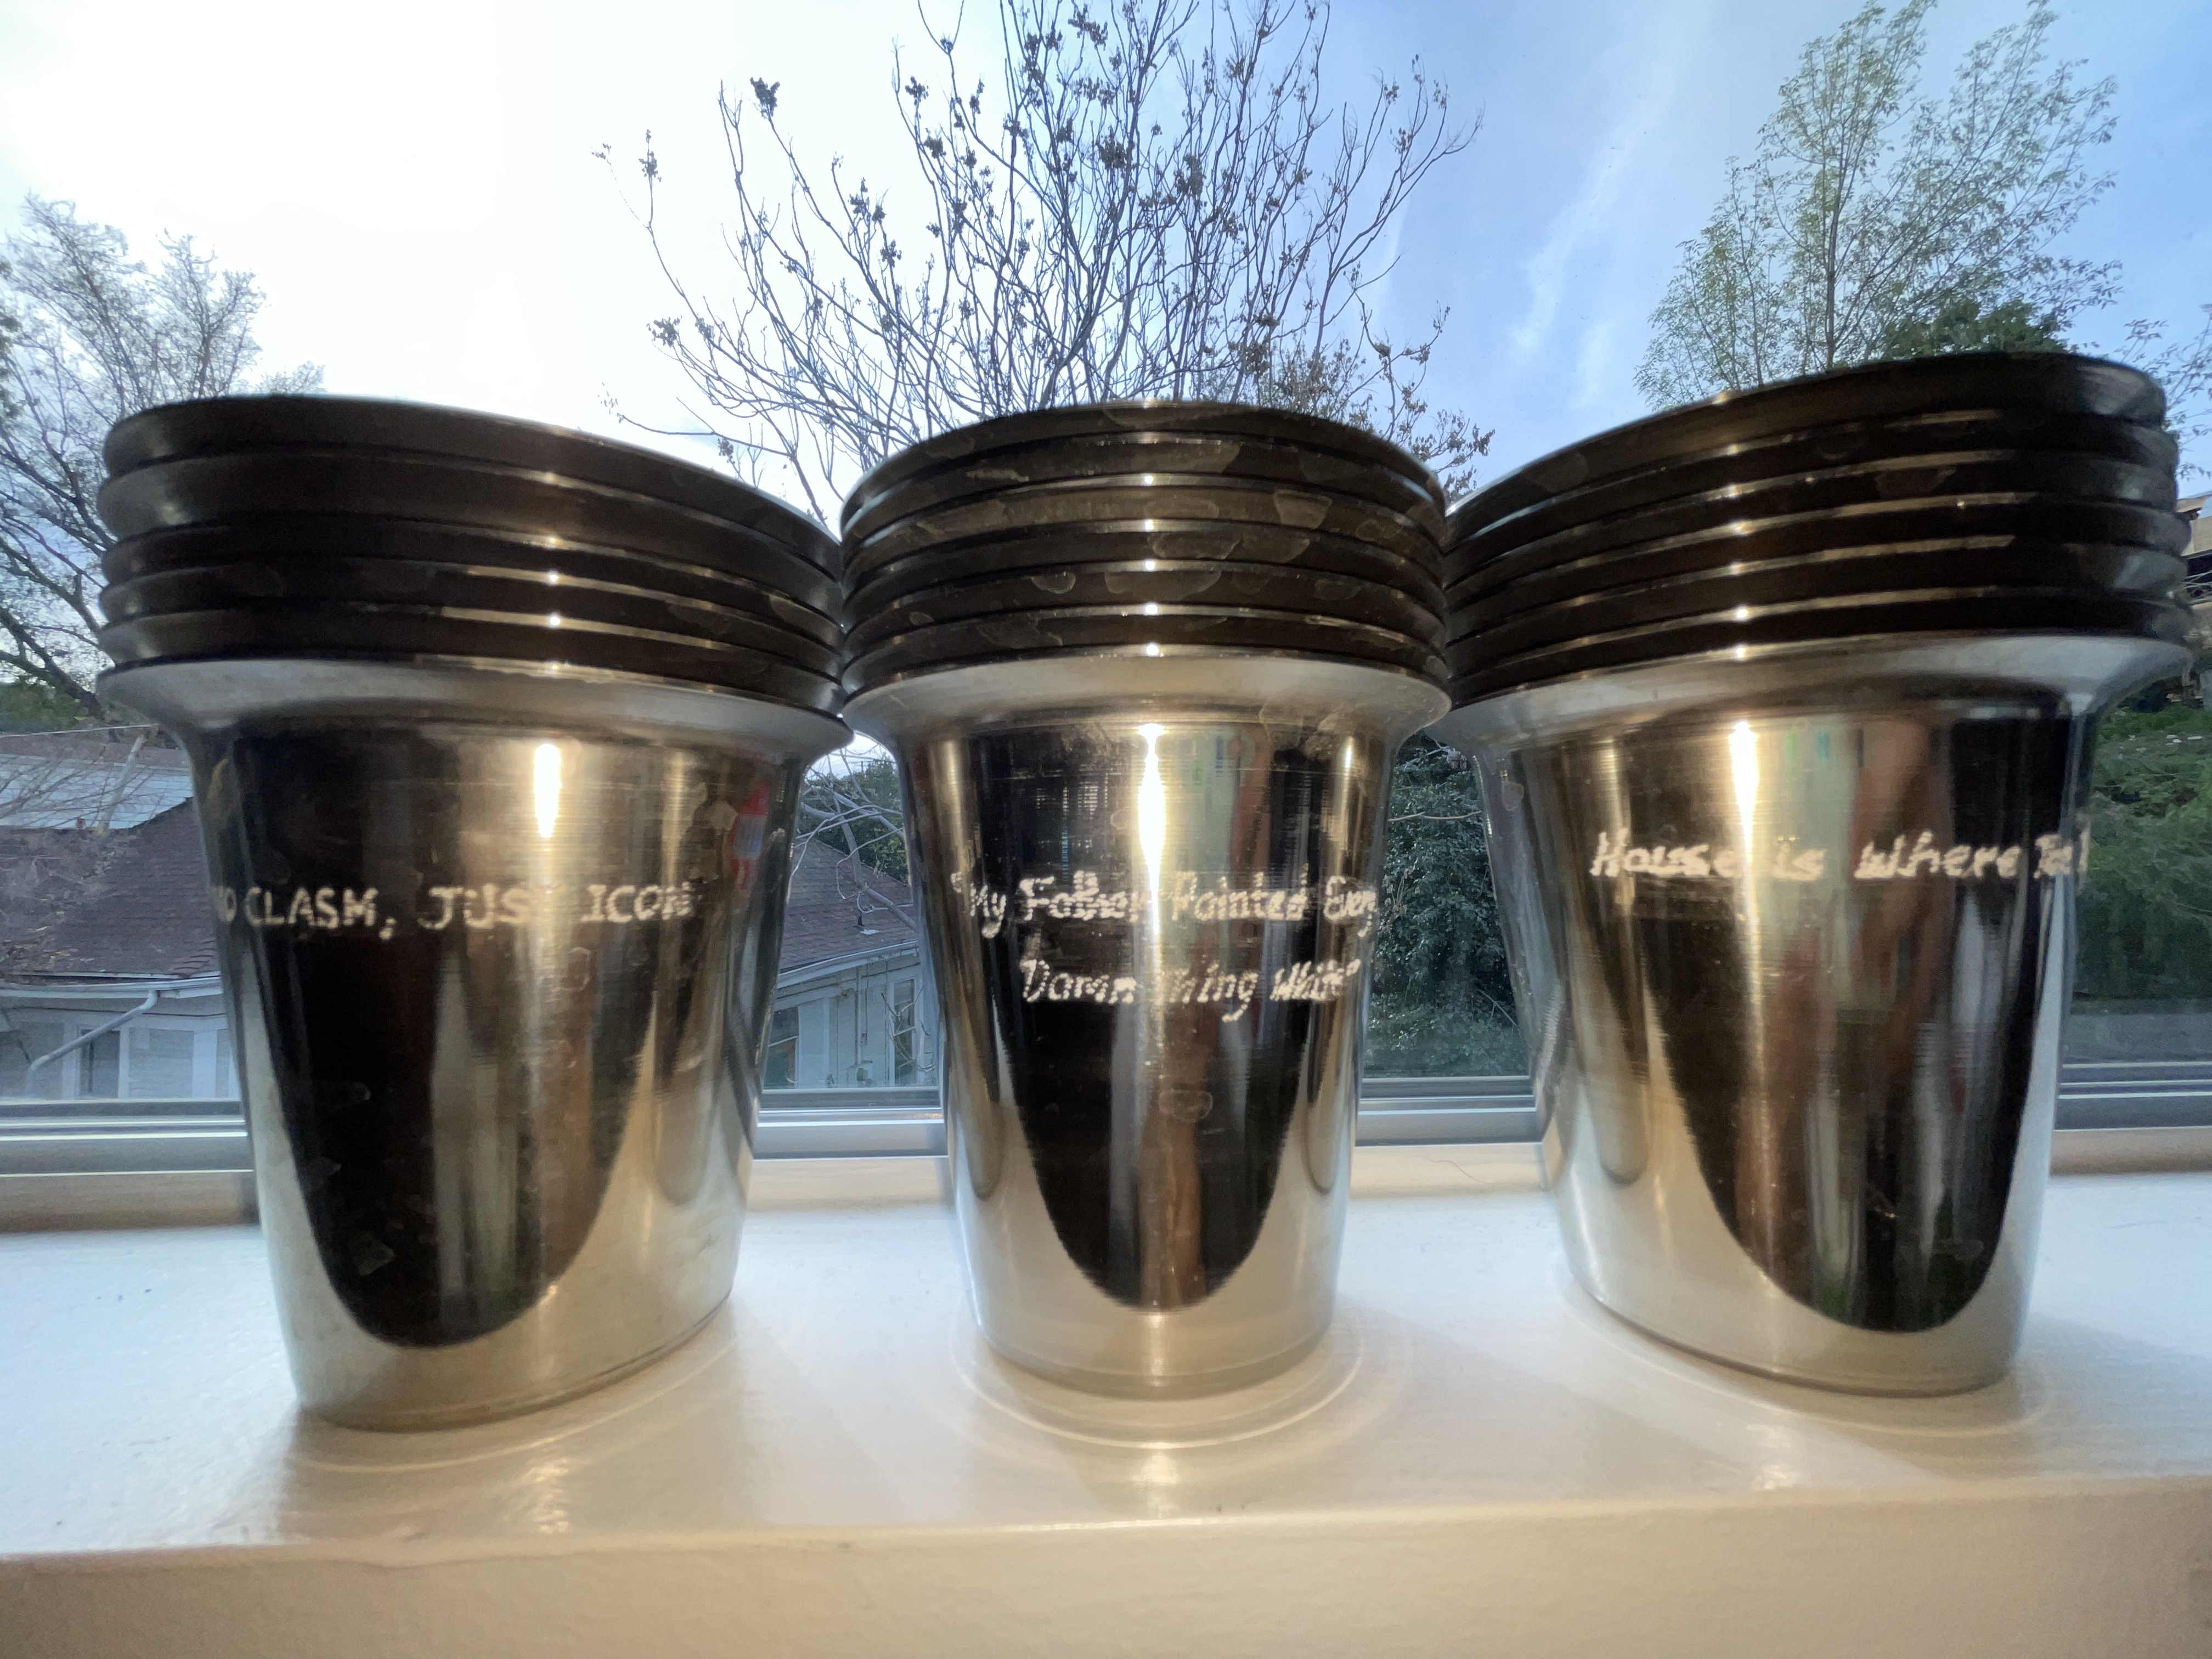 many silver tumblers are in three stacks. the tumblers have different phrases engraved on them